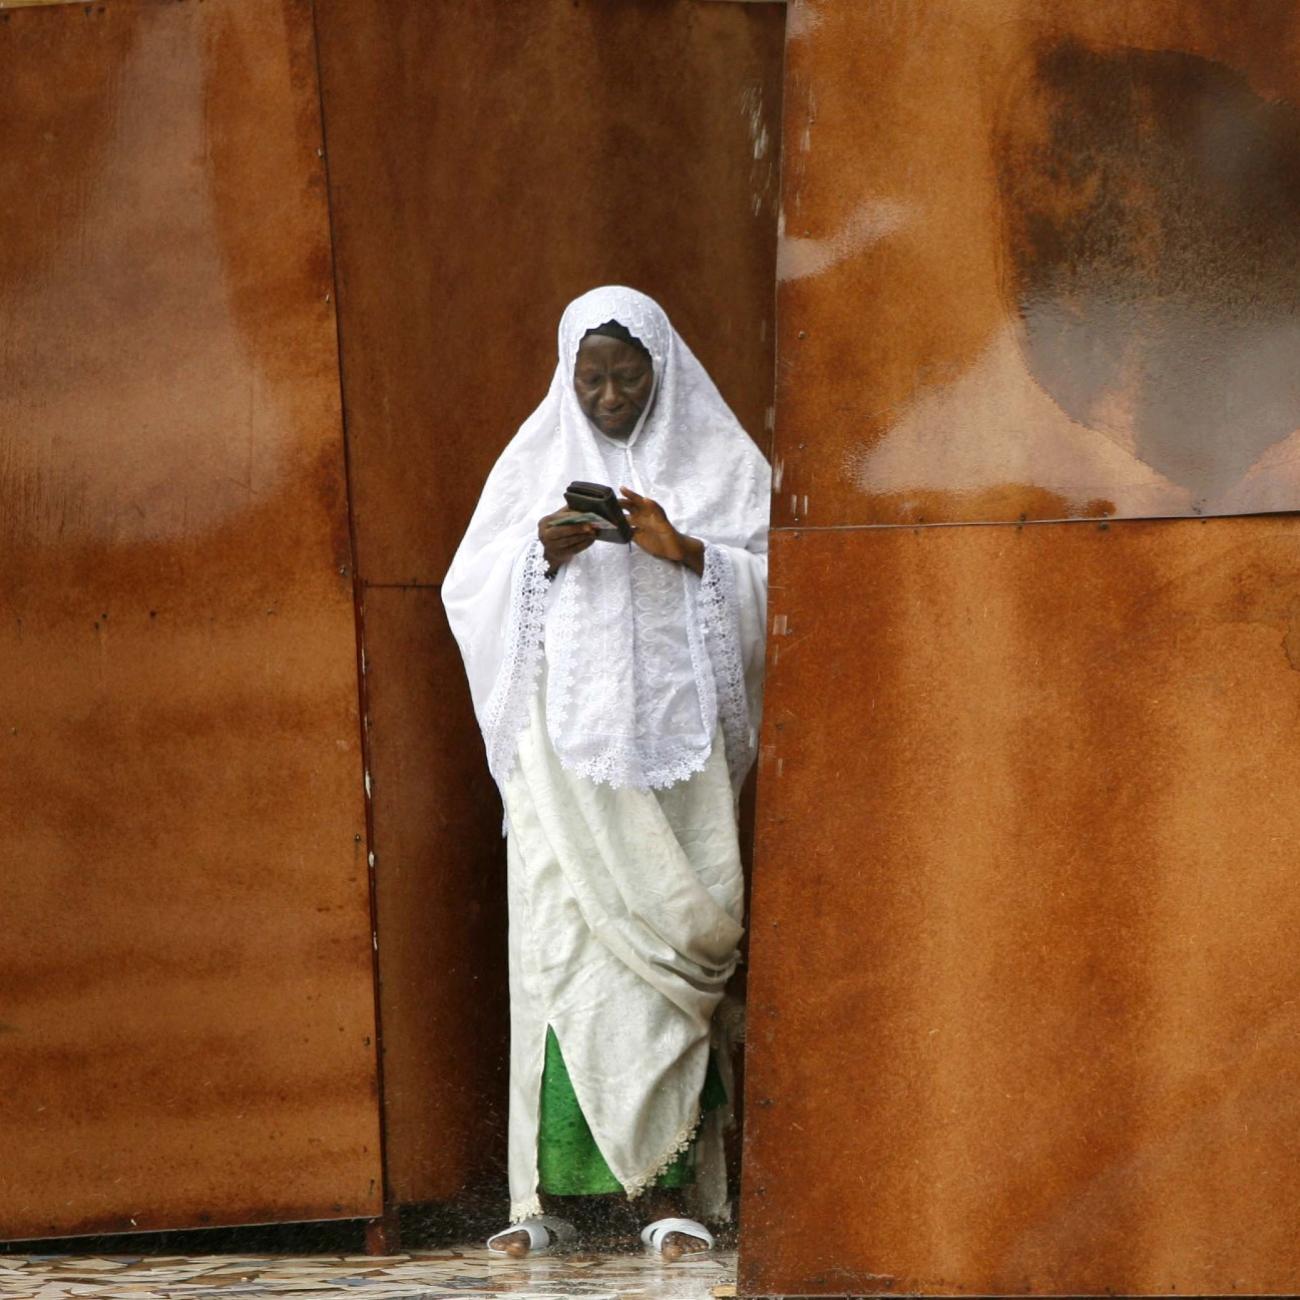 A Gambian woman puts her identity card back into her purse while exiting a polling station, in Serekunda, Gambia, on September 22, 2006.